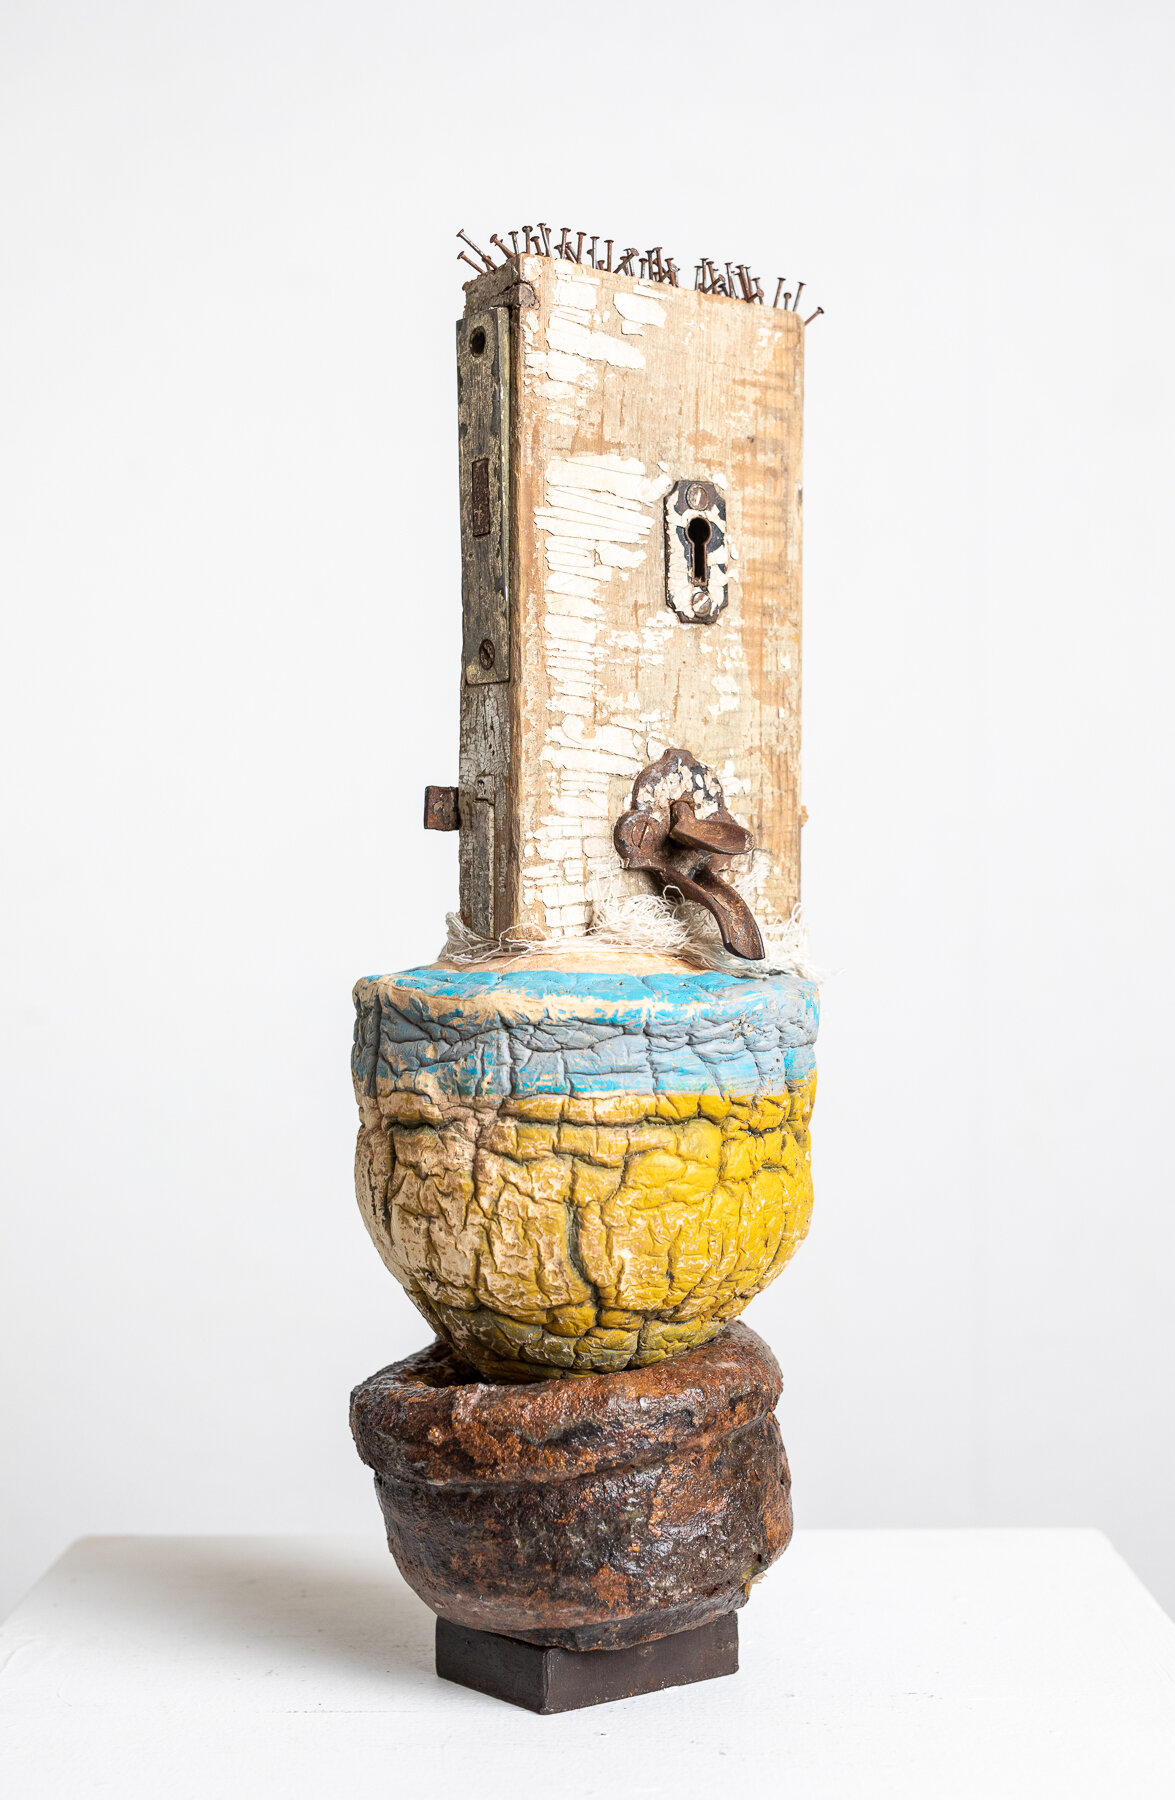    Smithereens     found objects, steel; 14 x 6 x 4 inches 